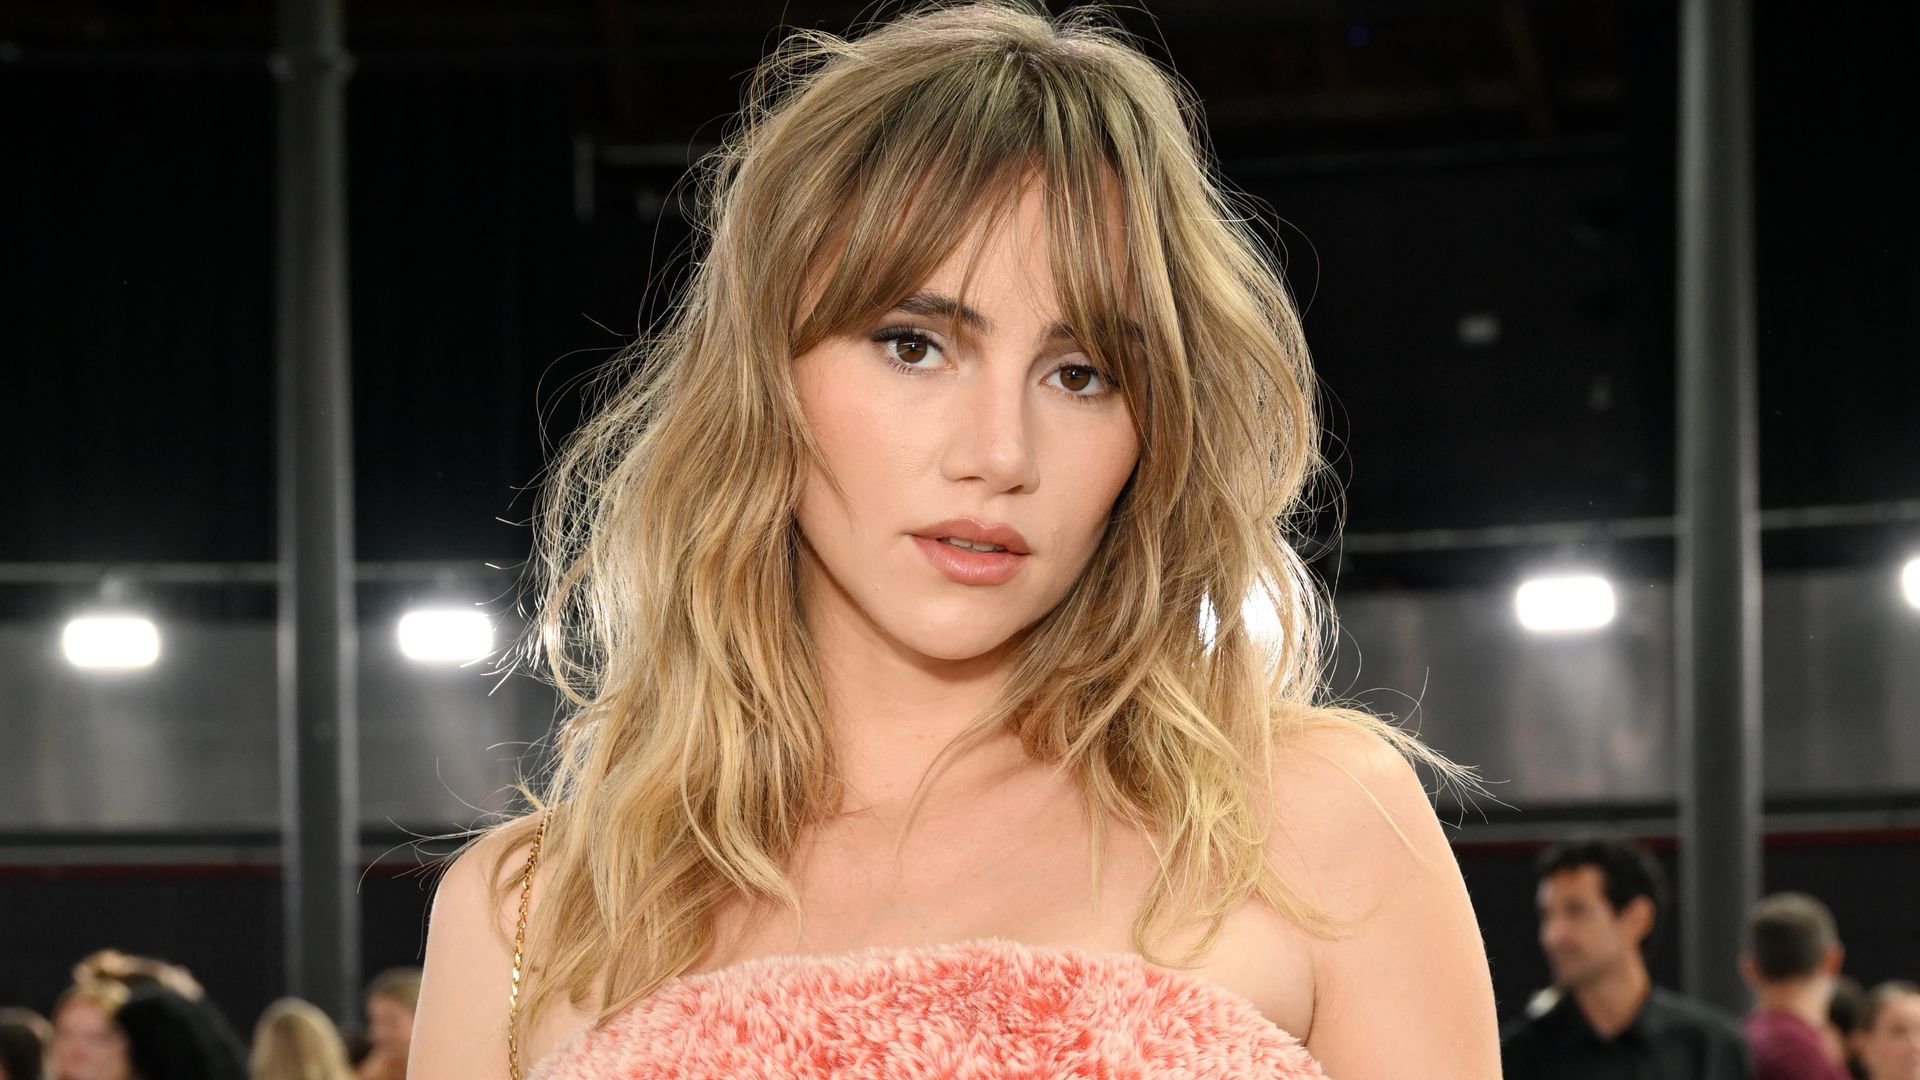 Suki Waterhouse channeled Princess Diana in one of her favorite dresses from the 80s